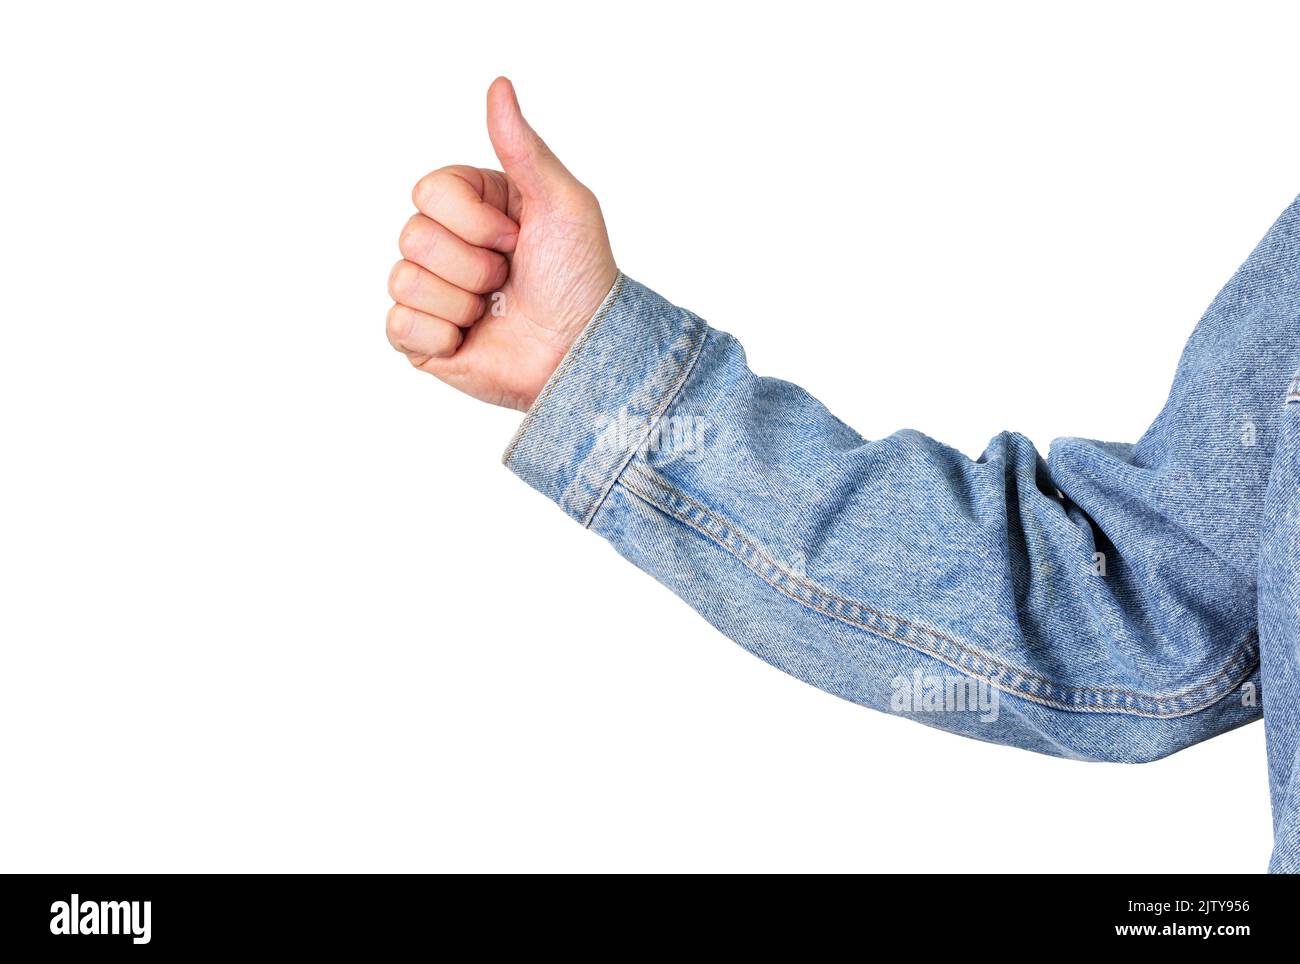 Male wearing denim jacket with thumbs up sign isolated on white with copy space Stock Photo